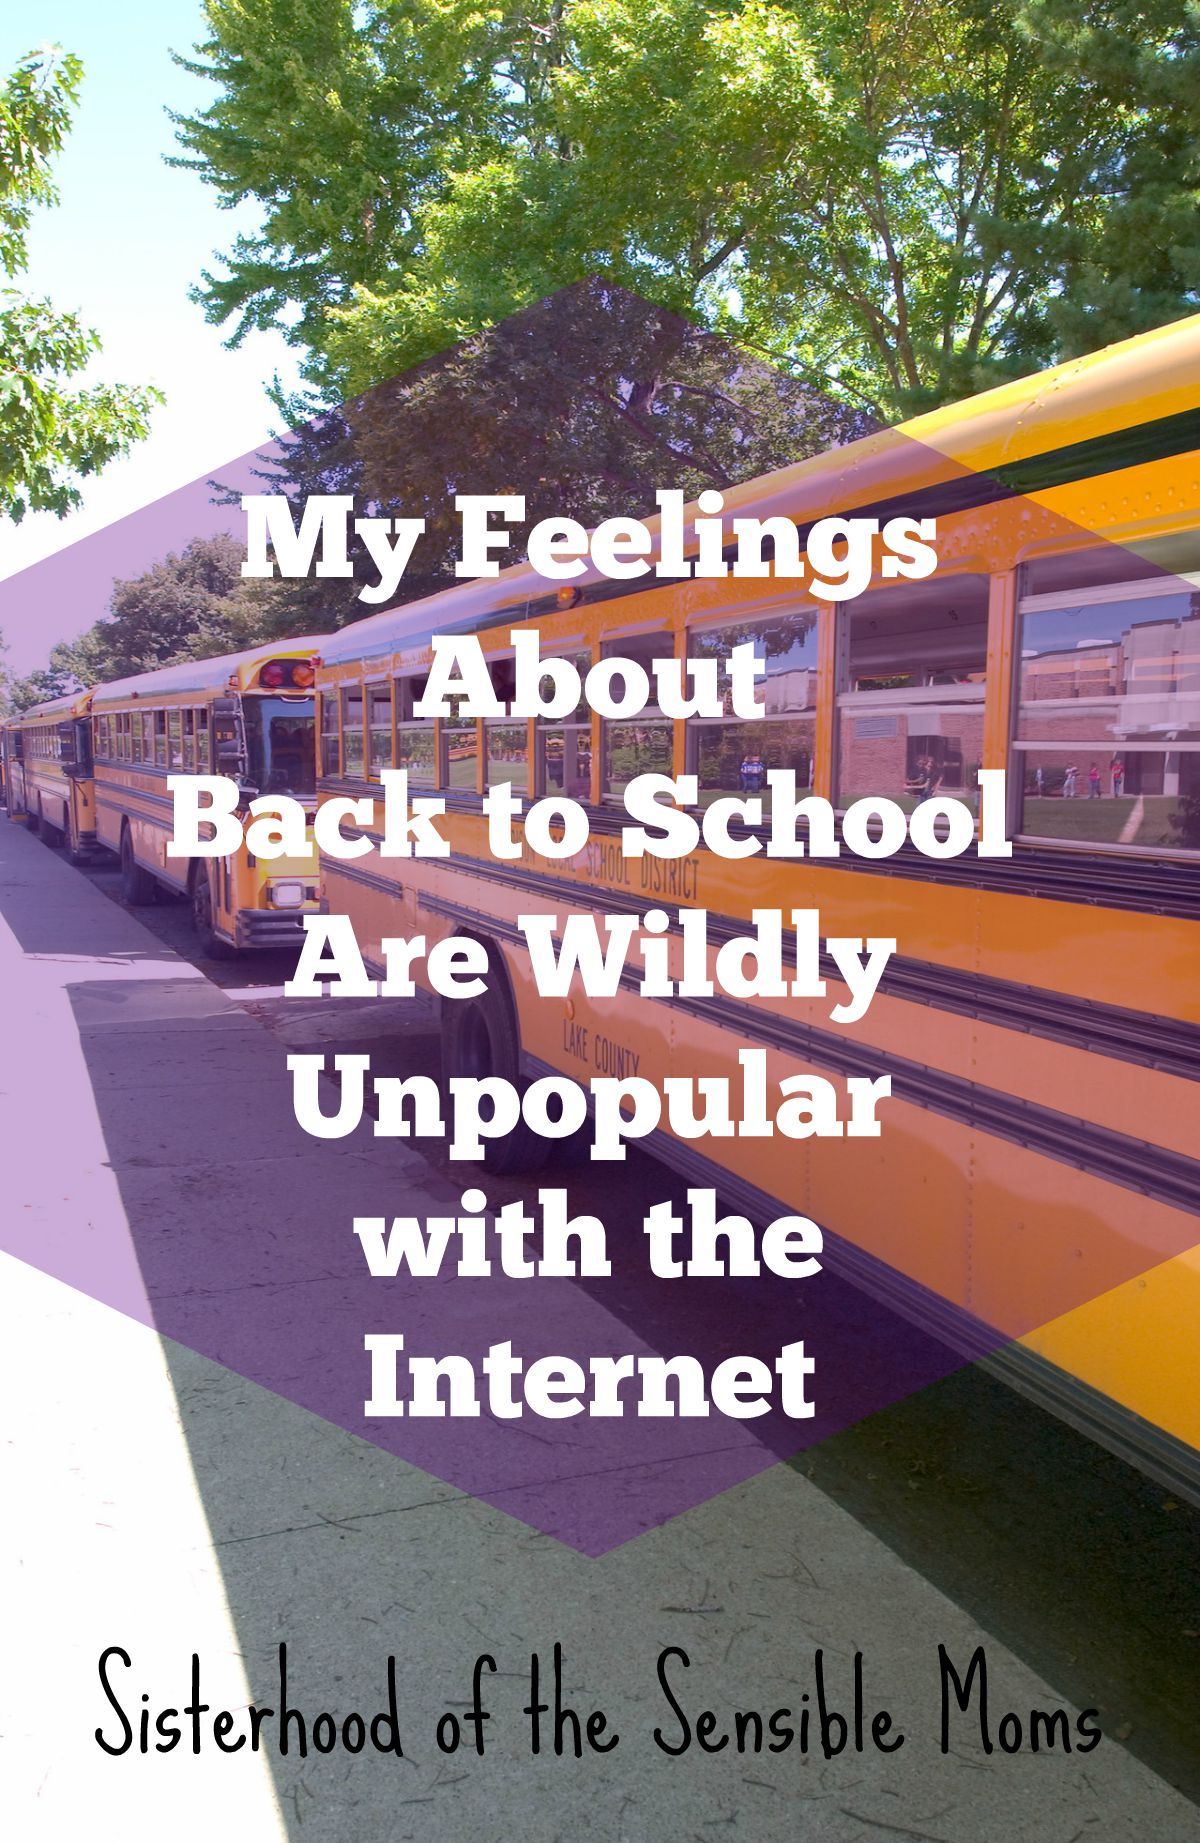 My Feelings About Back to School Are Wildly Unpopular with the Internet | Parenting | Sisterhood of the Sensible Moms